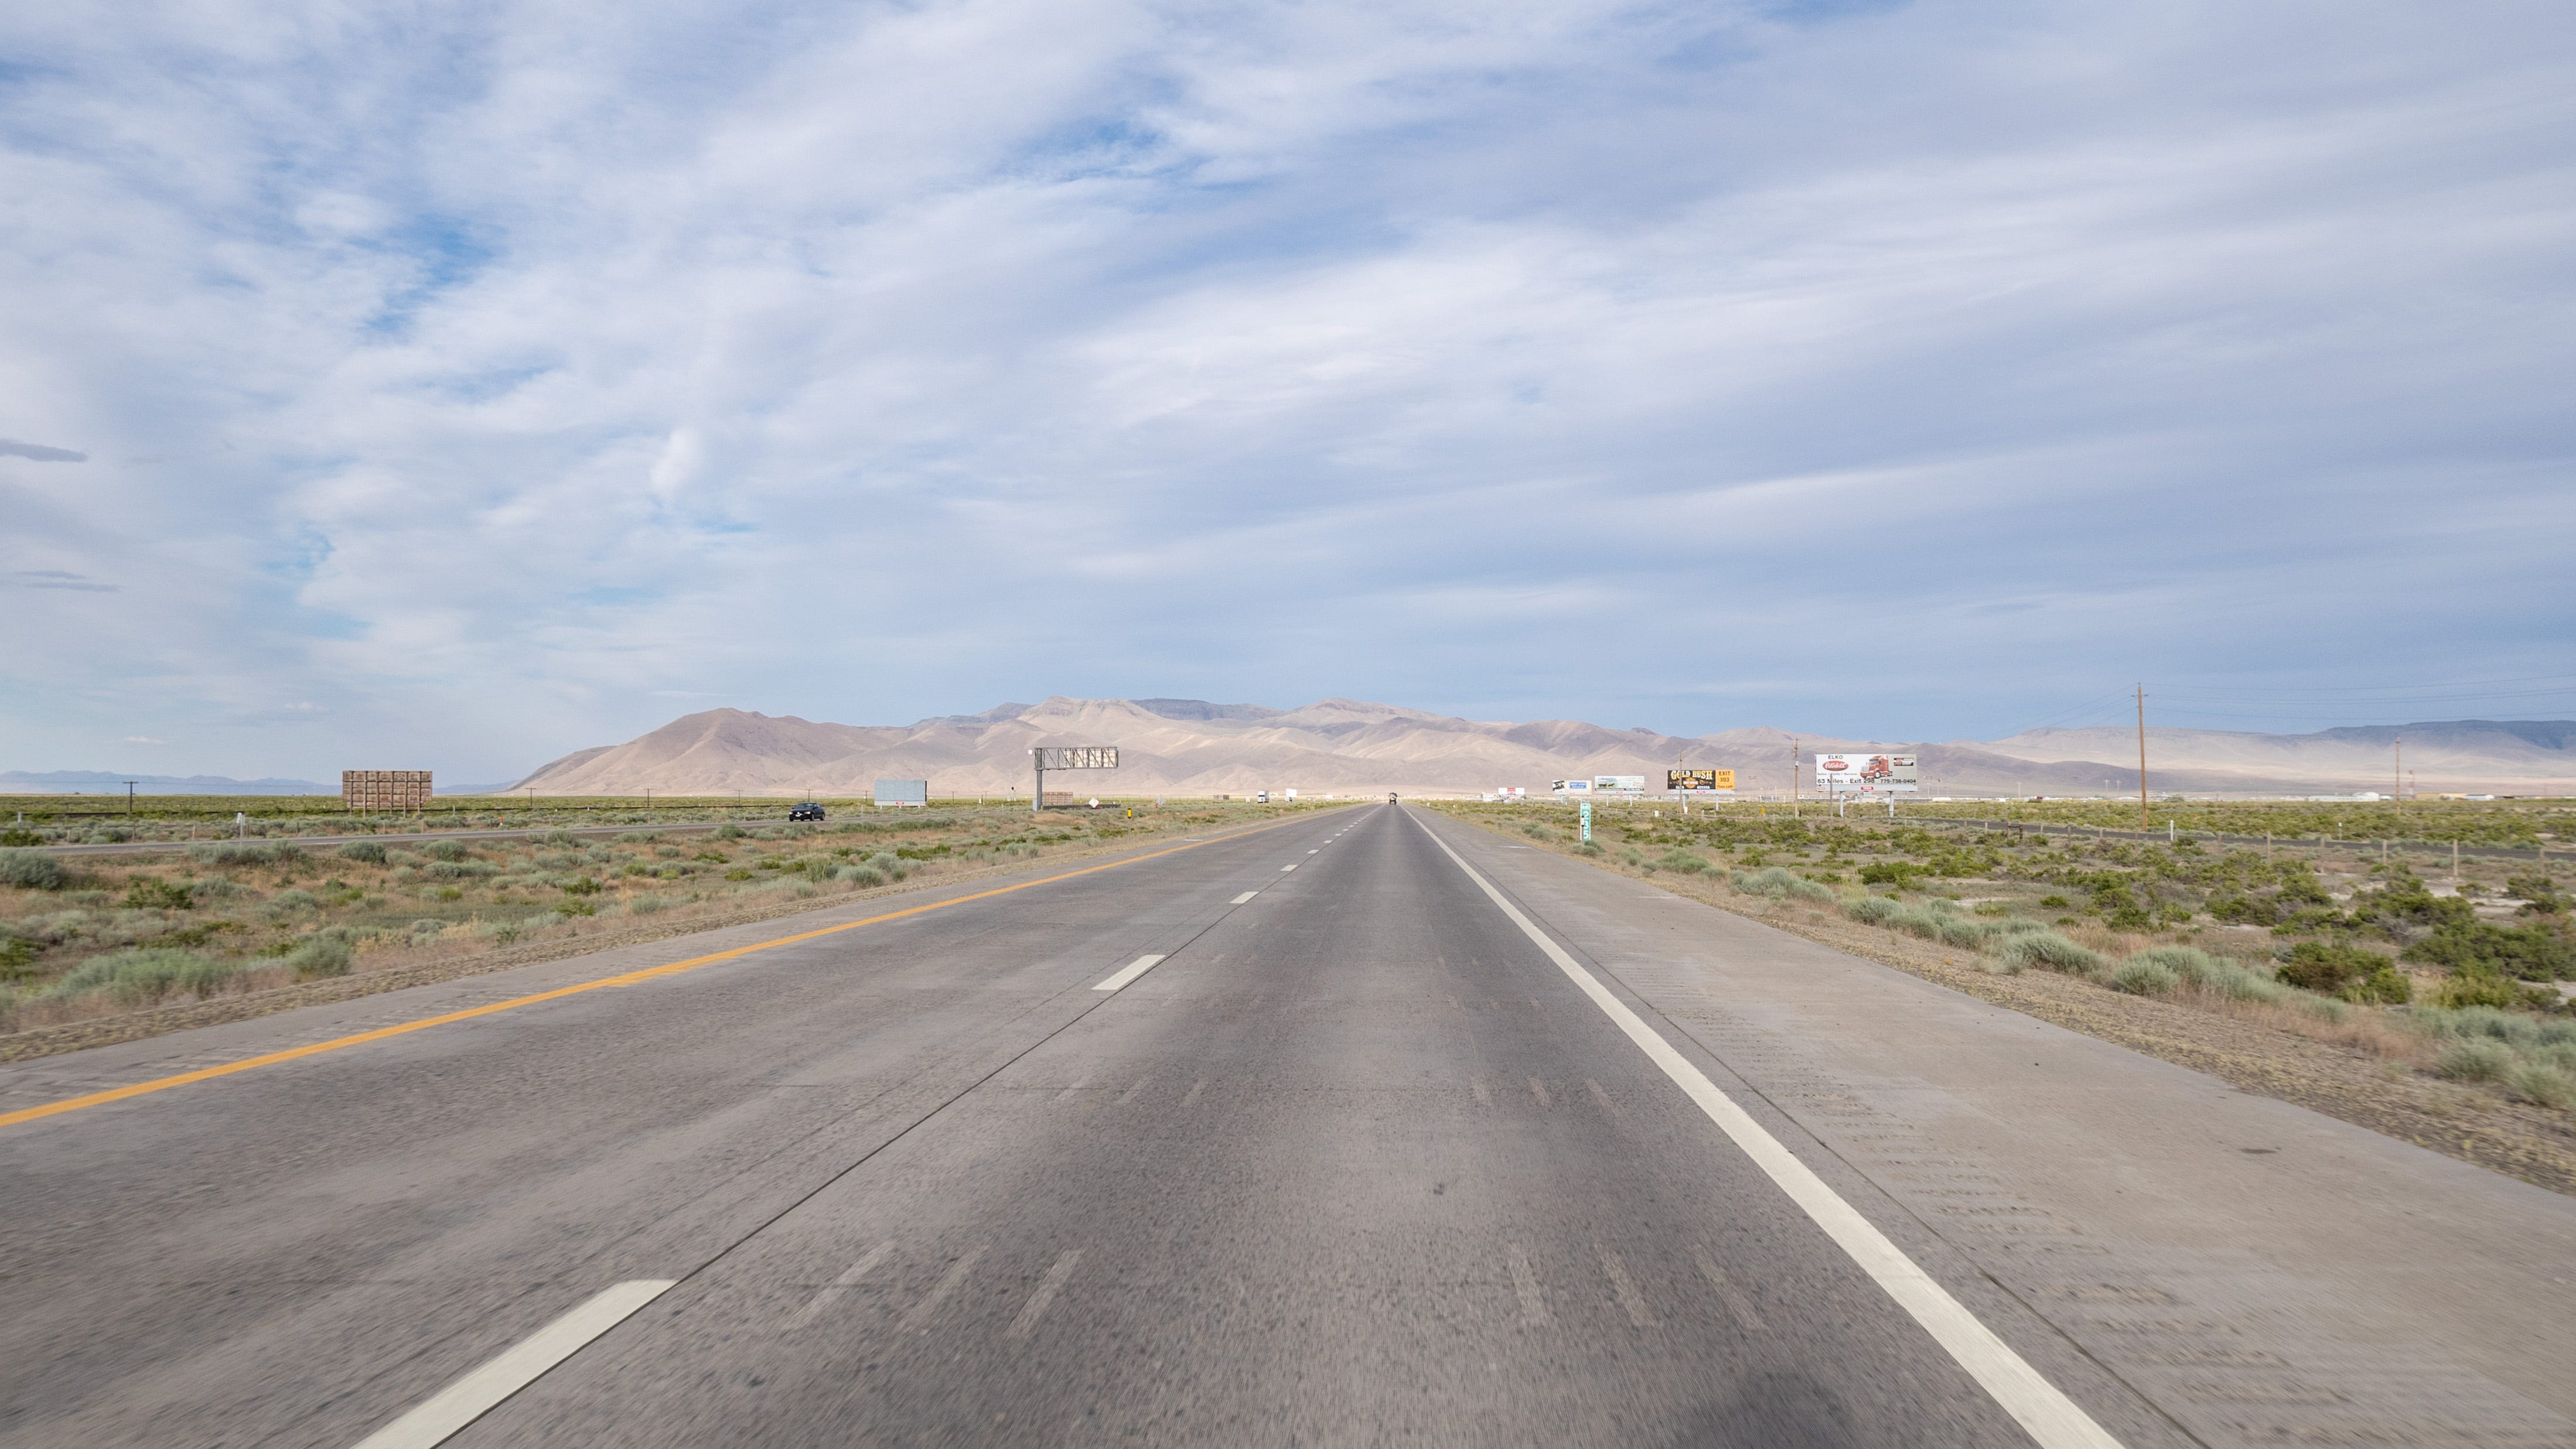 Photo of Intersate 80, heading east. The two eastbound lanes (and broad shoulder) are flat and empty. On either side of the highway is the desert and scrub brush. In the distance, large billboards line the side of the road. Further, beyond the vanishing point of the highway, is a wall of naked, treeless, rugged mountains. The sky is blue and streaked with clouds. The sun is high overhead.